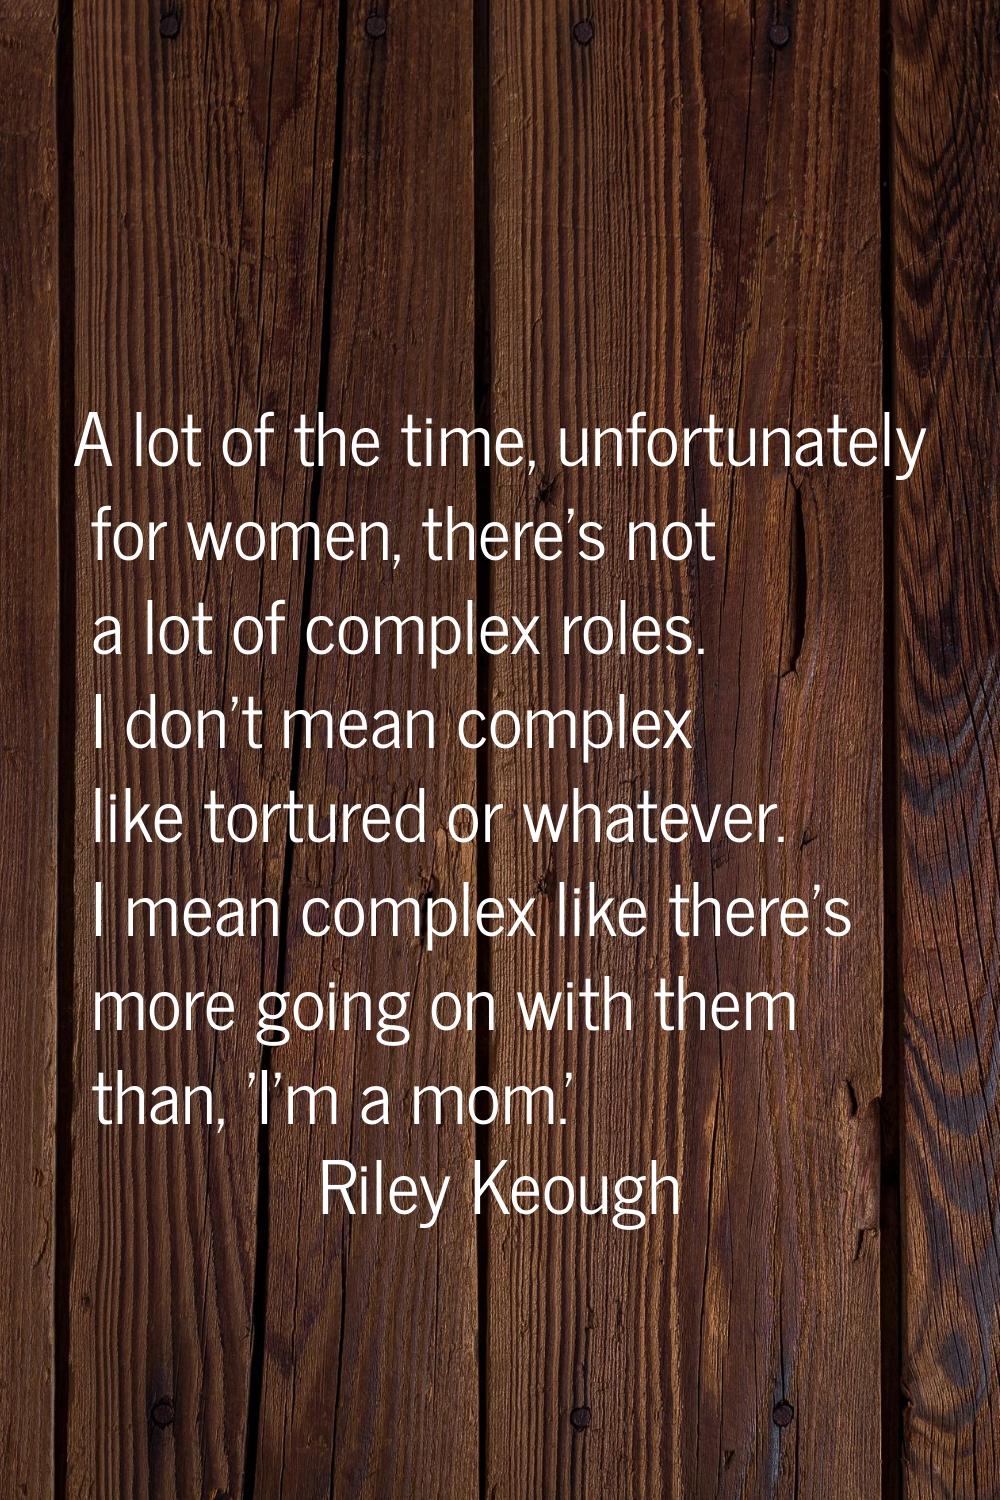 A lot of the time, unfortunately for women, there's not a lot of complex roles. I don't mean comple